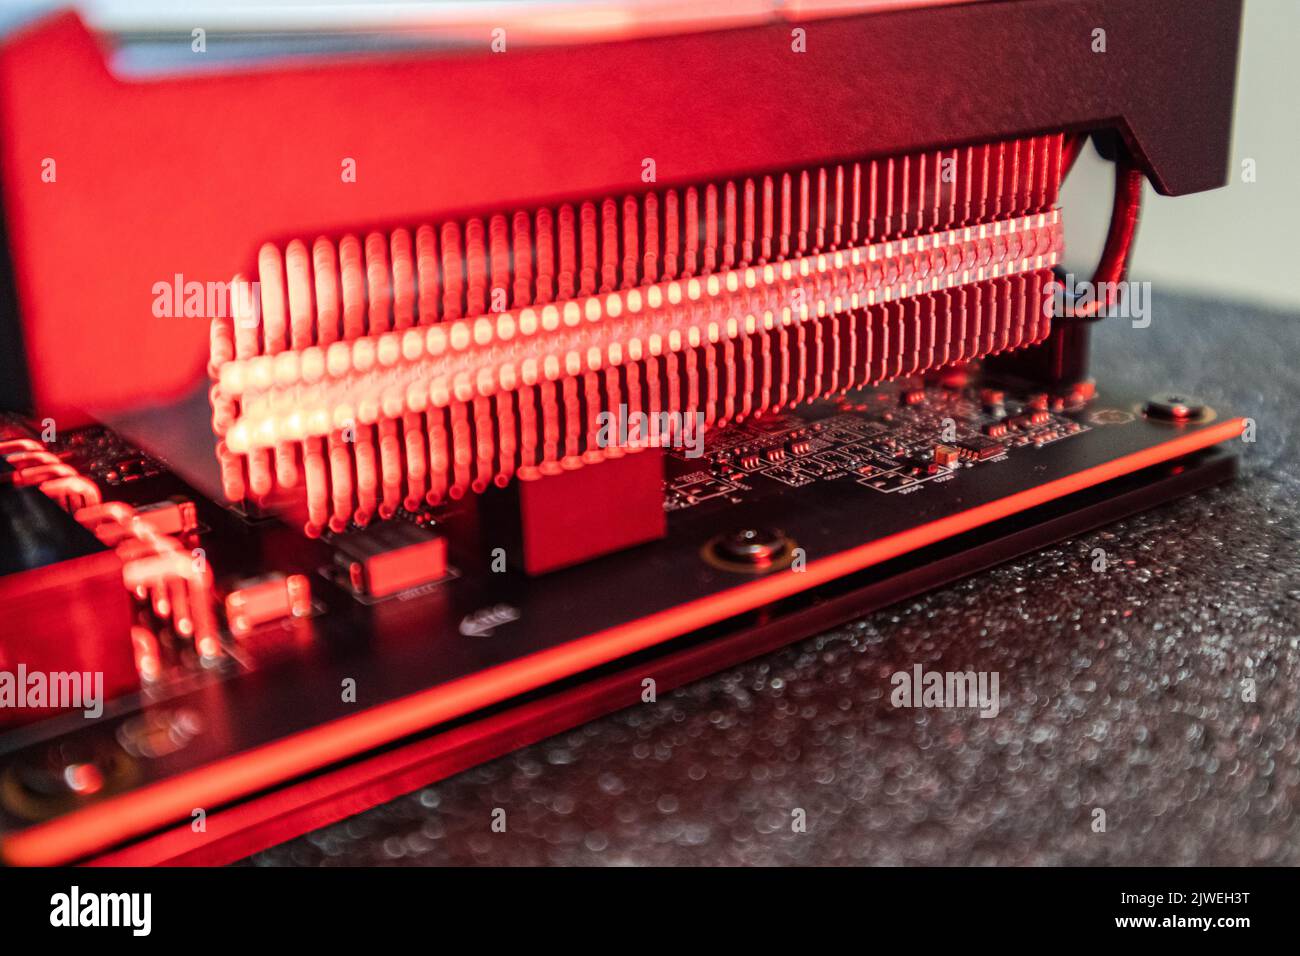 Gpu graphics or video card cooling system close-up in red light, PC hardware electronics details, components for gamer or crypto mining Stock Photo